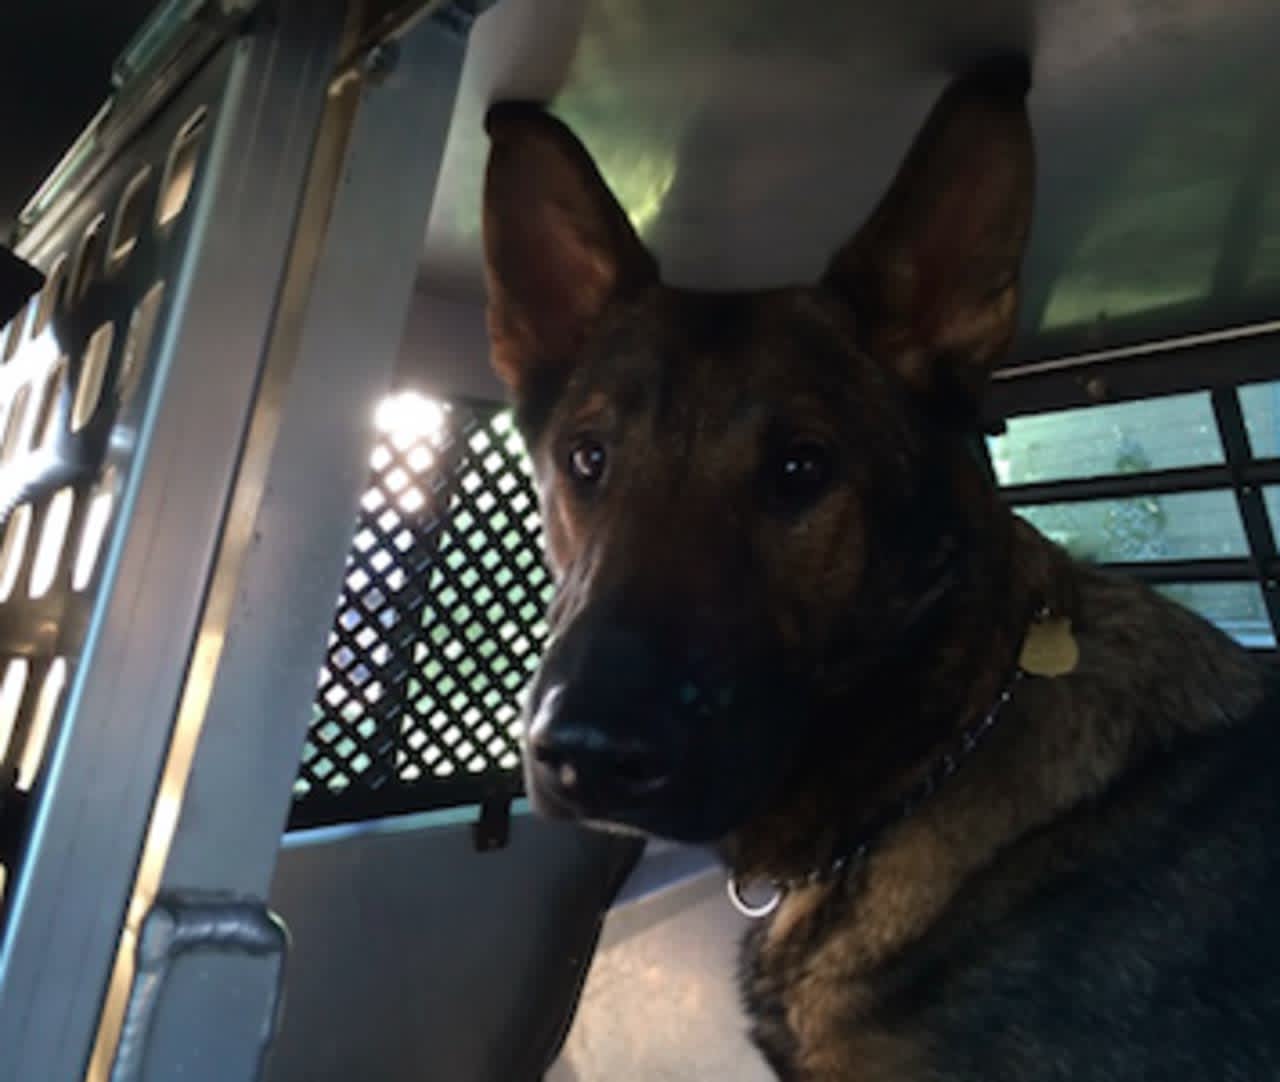 Connecticut State Police K-9 Asher will receive body armor from the charitable organization Vested Interest in K9s